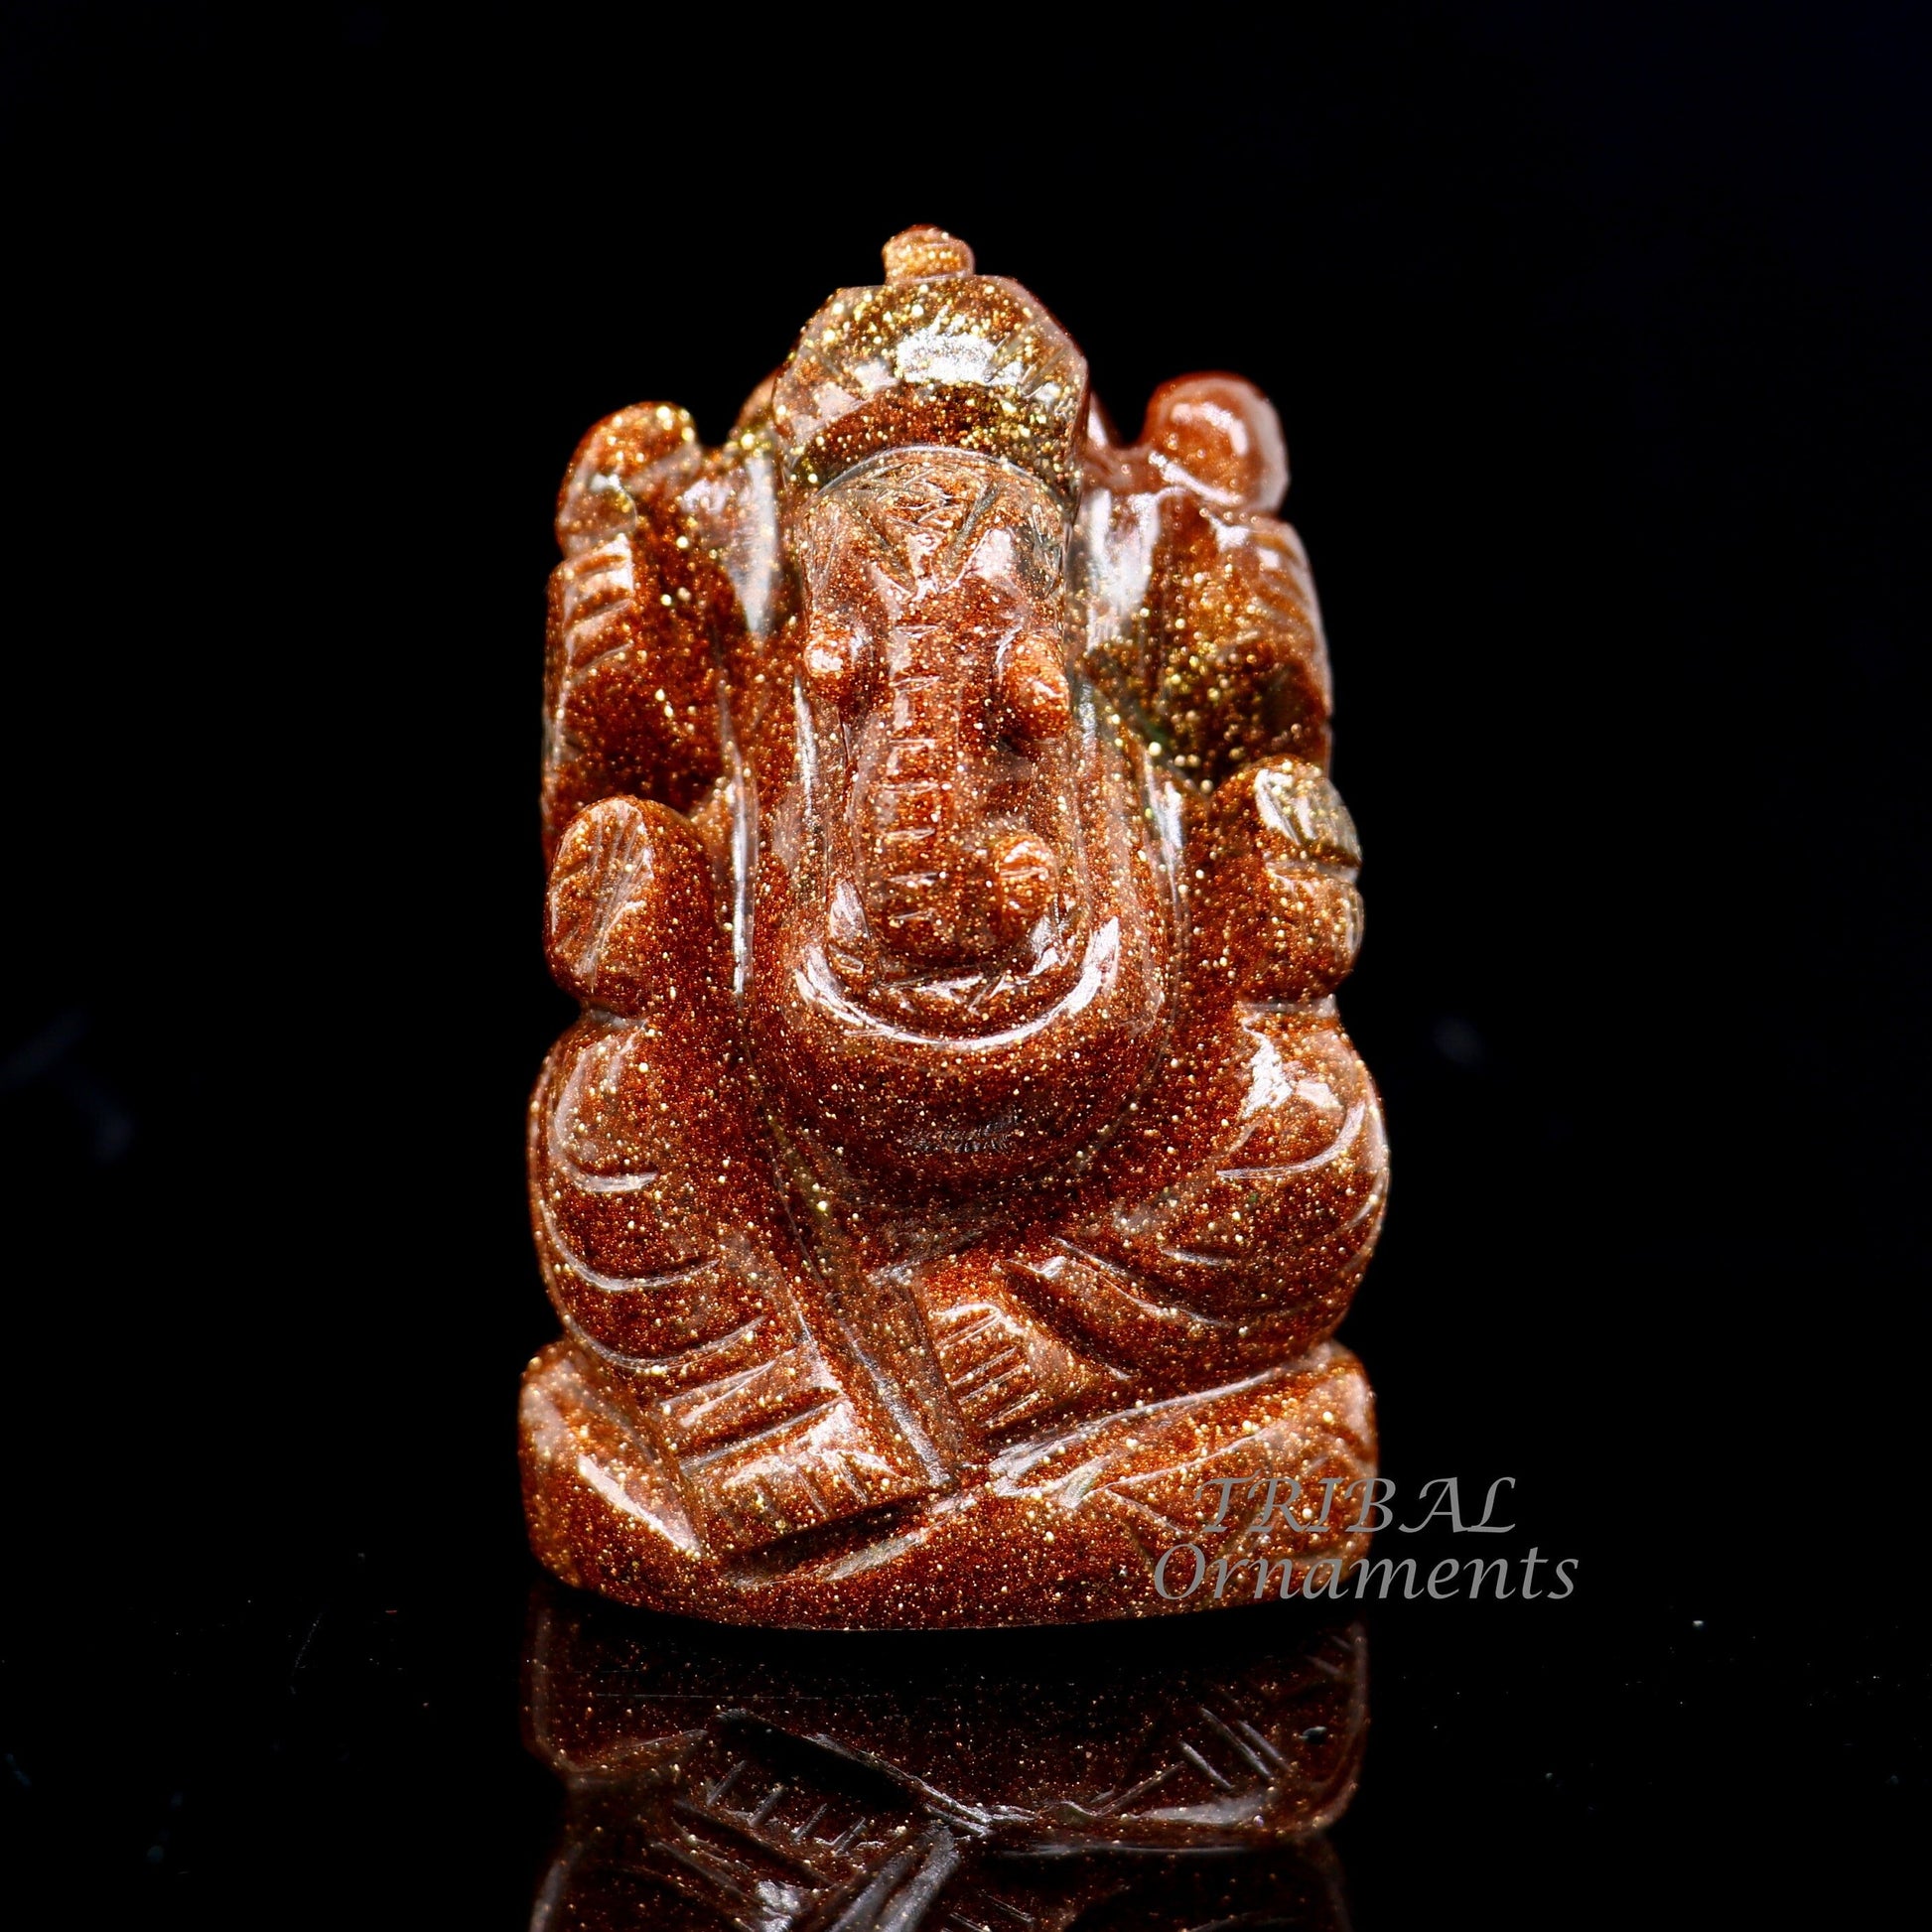 Amazing Sun stone Lord Ganesha handcrafted statue figurine temple divine God Ganesha stone sculpture for wealth and prosperity stna10 - TRIBAL ORNAMENTS